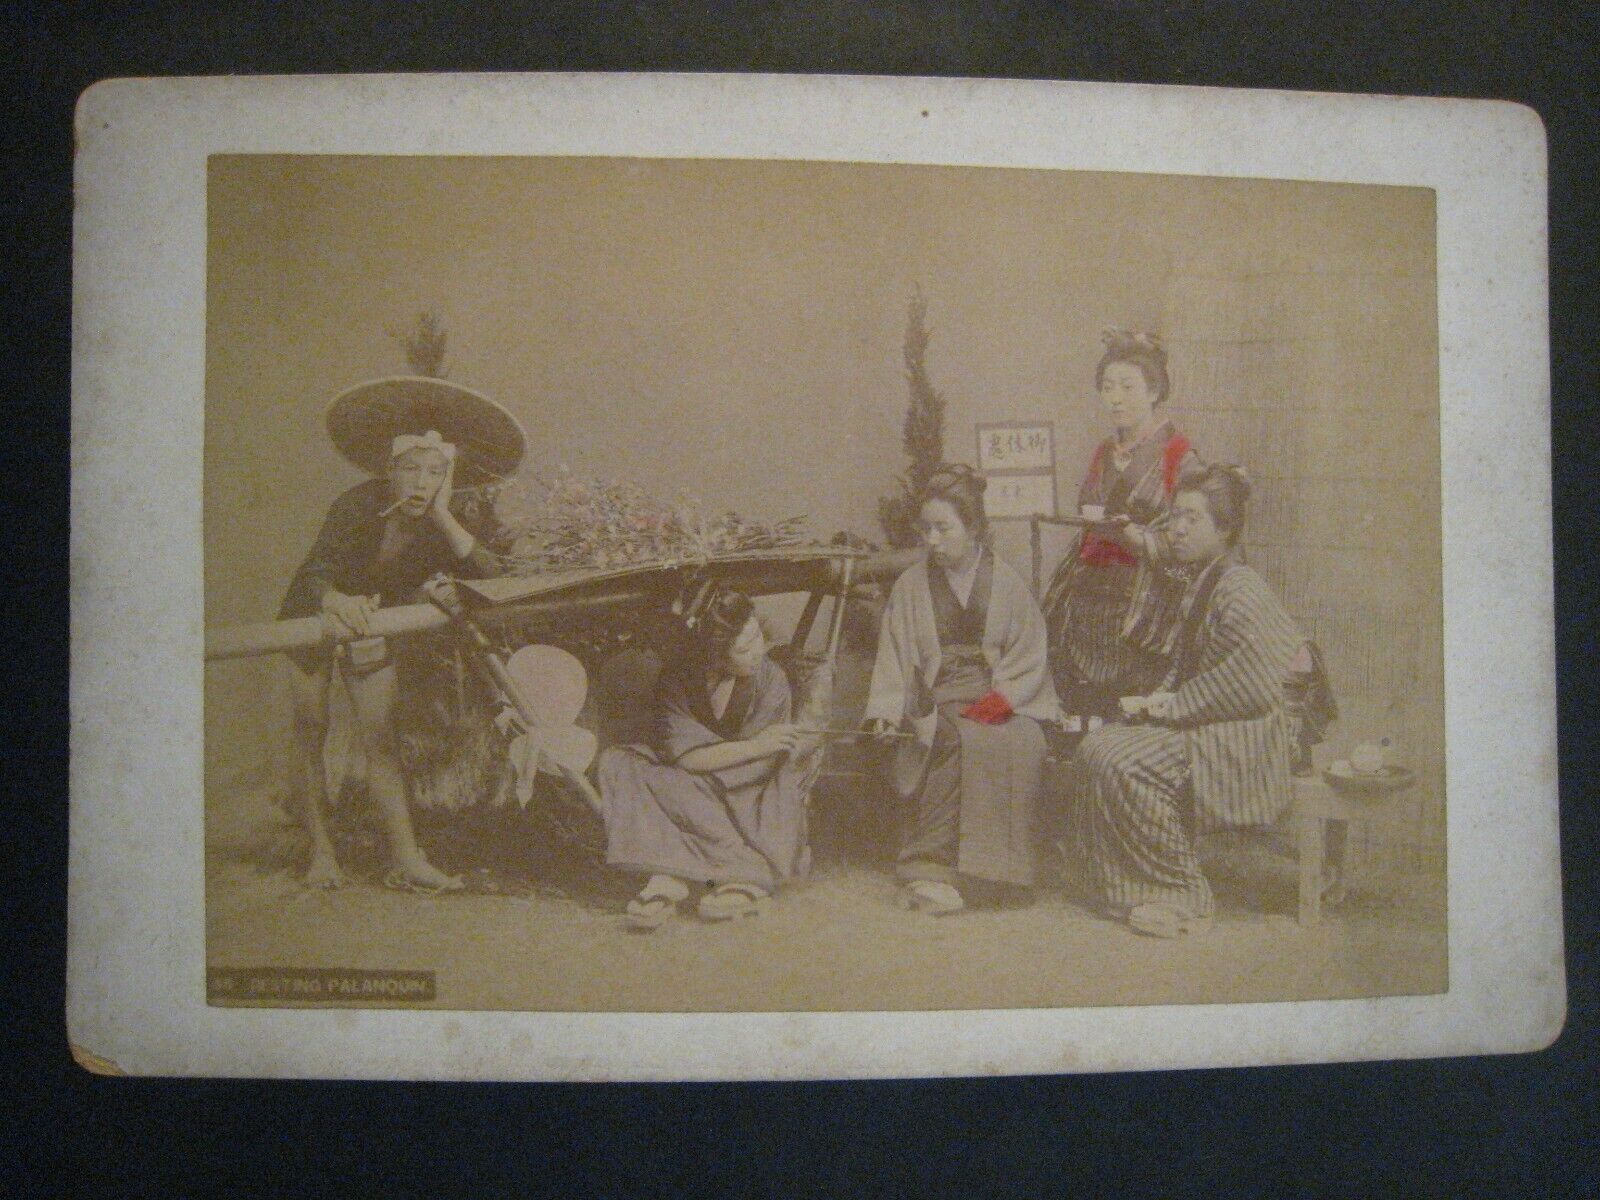  Late19th Century Cabinet card ... Japanese, Resting Palanquin